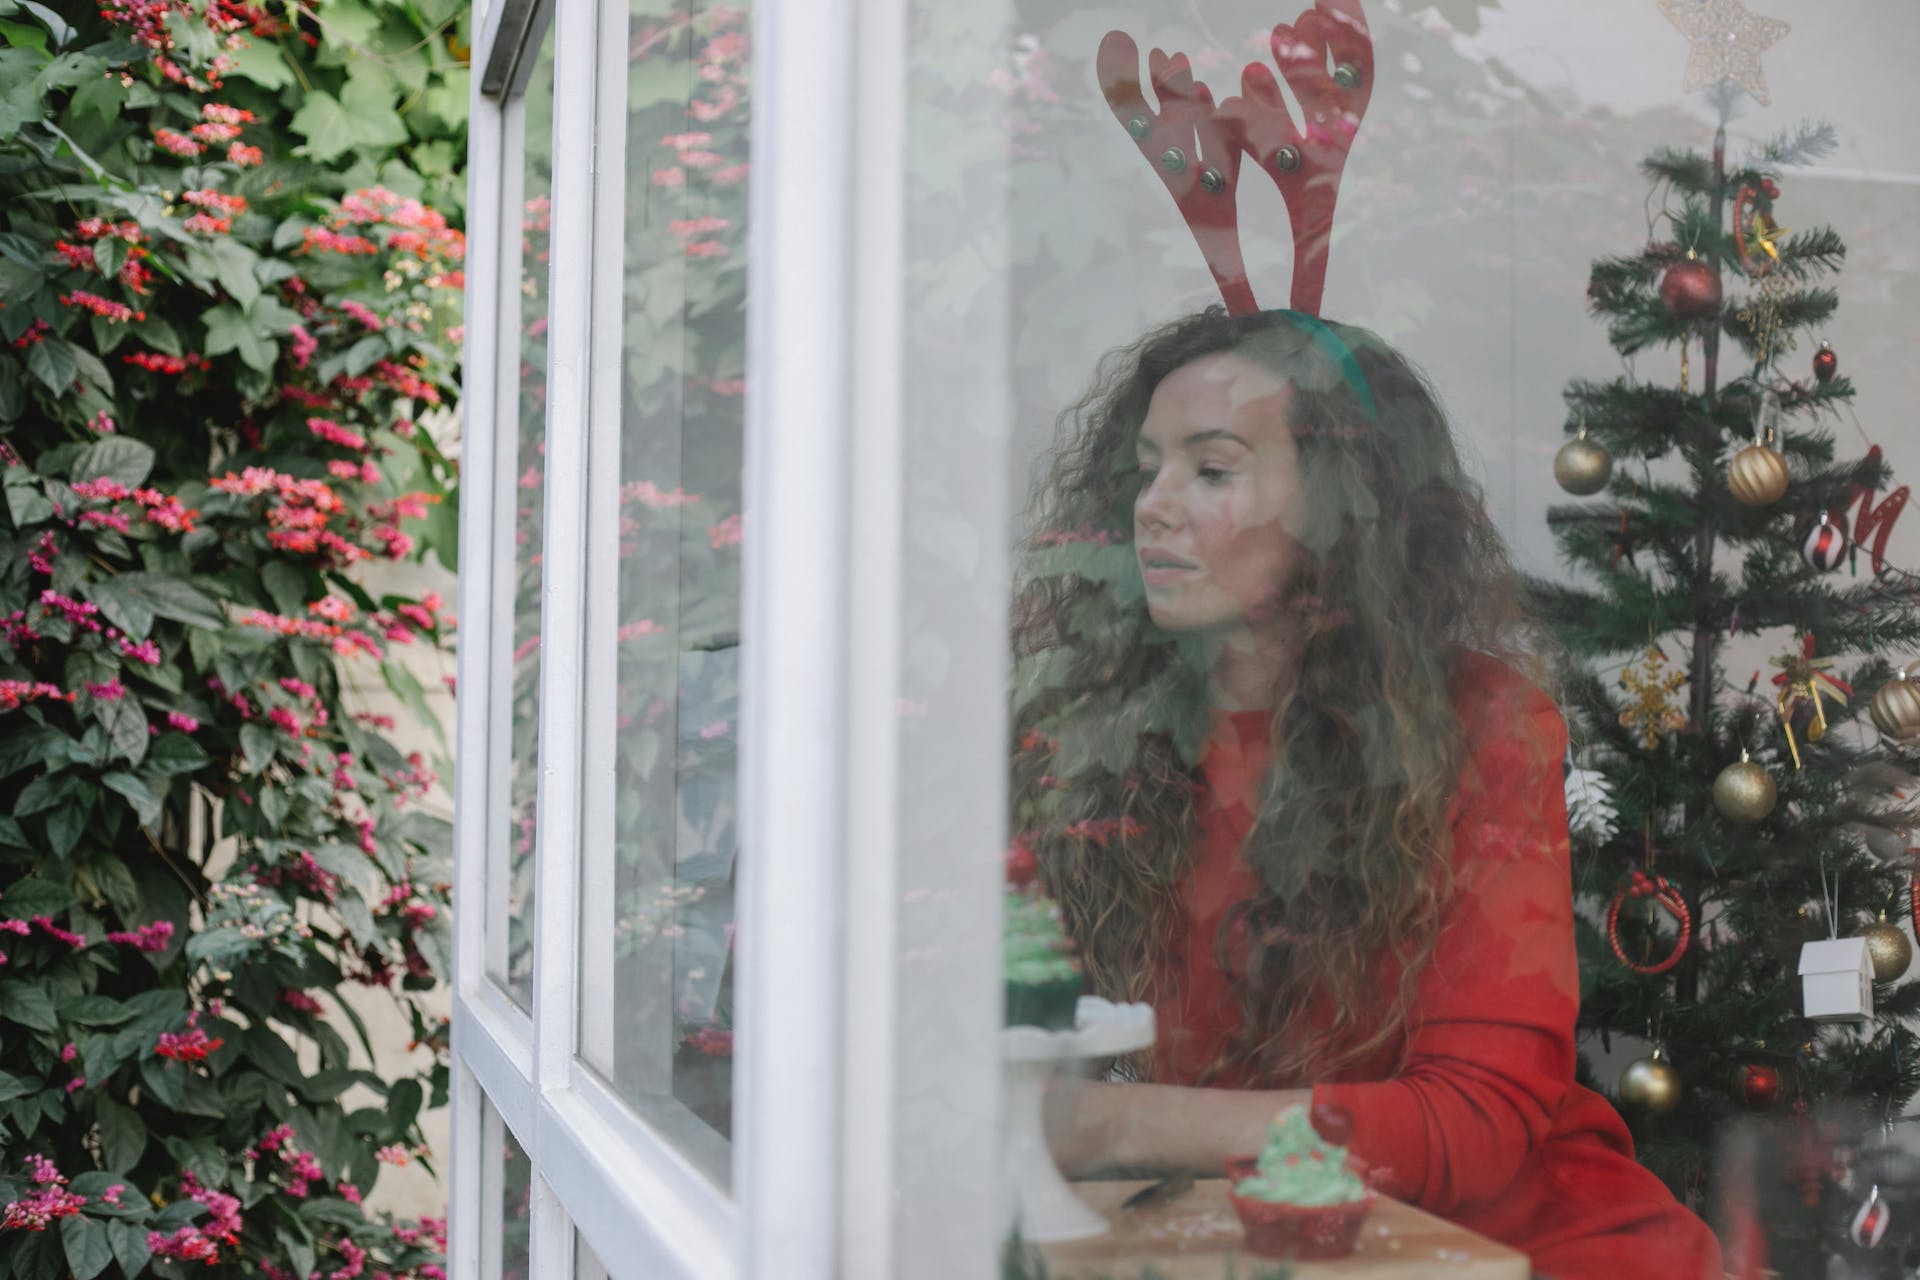 A woman looking out the window with Christmas decorations in the background | Source: Pexels